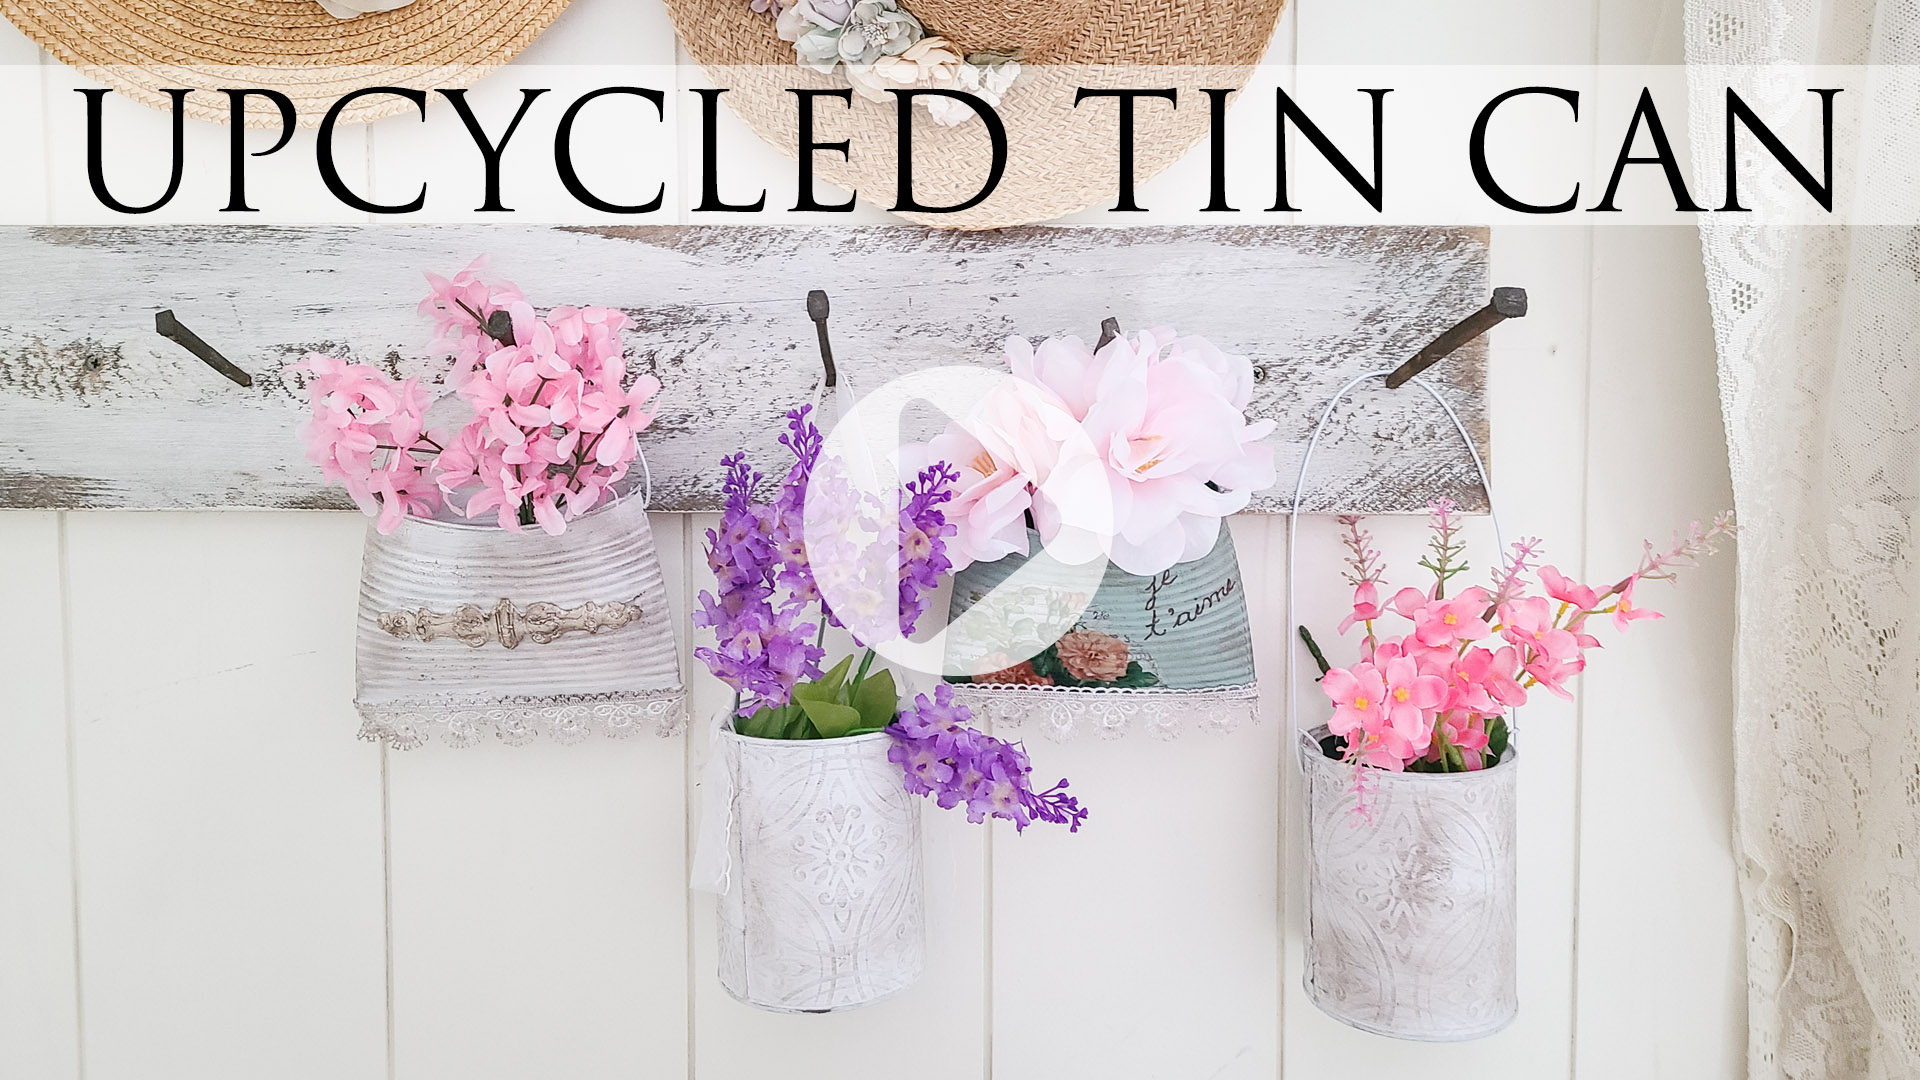 Video Tutorial for Upcycled Tin Can by Larissa of Prodigal Pieces | prodigalpieces.com #prodigalpieces